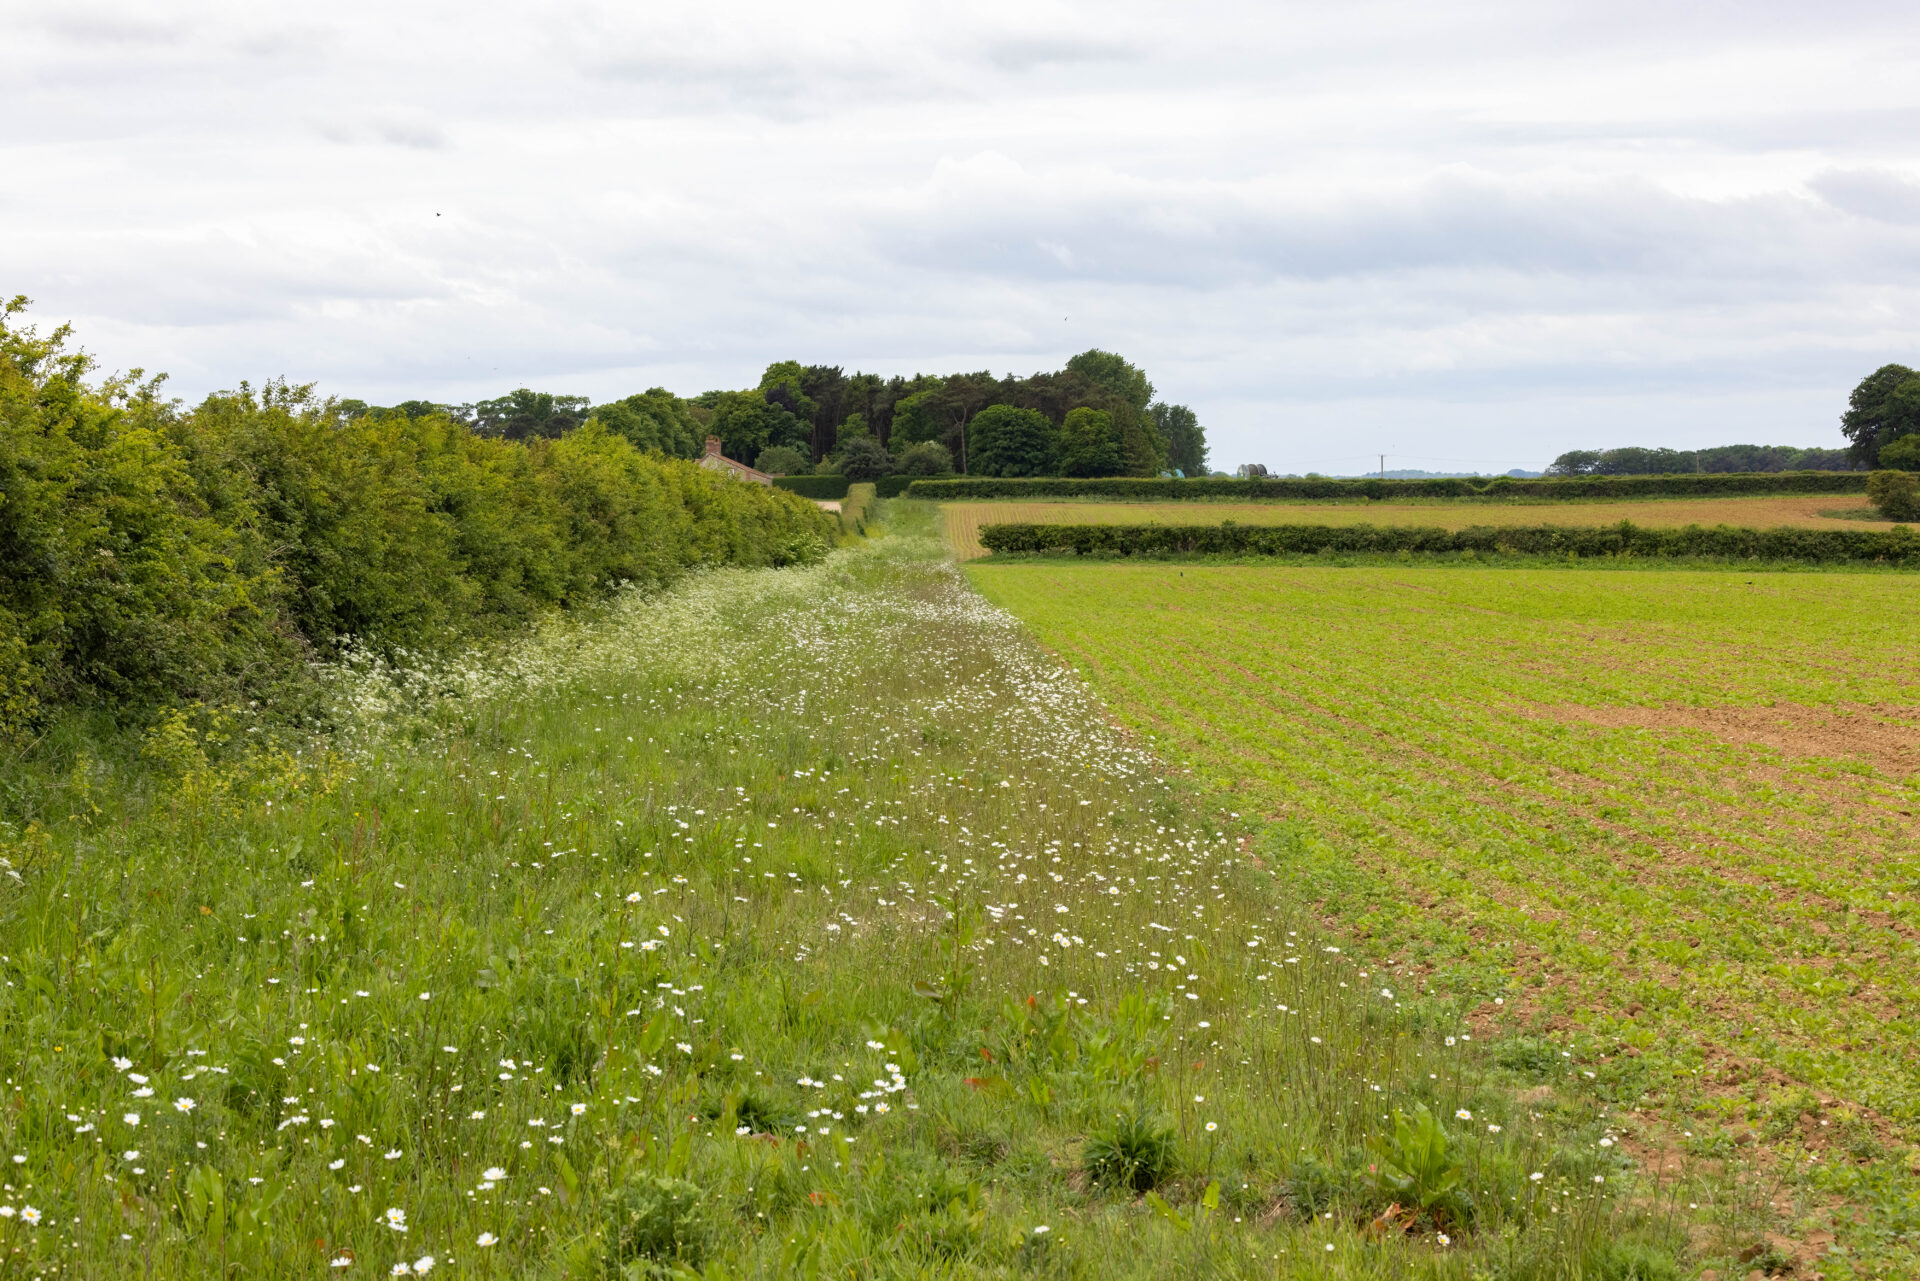 Wild flower Field Margin and Hedgerow. An example of how an agricultural field can be managed to allow wildlife to thrive alongside farming.